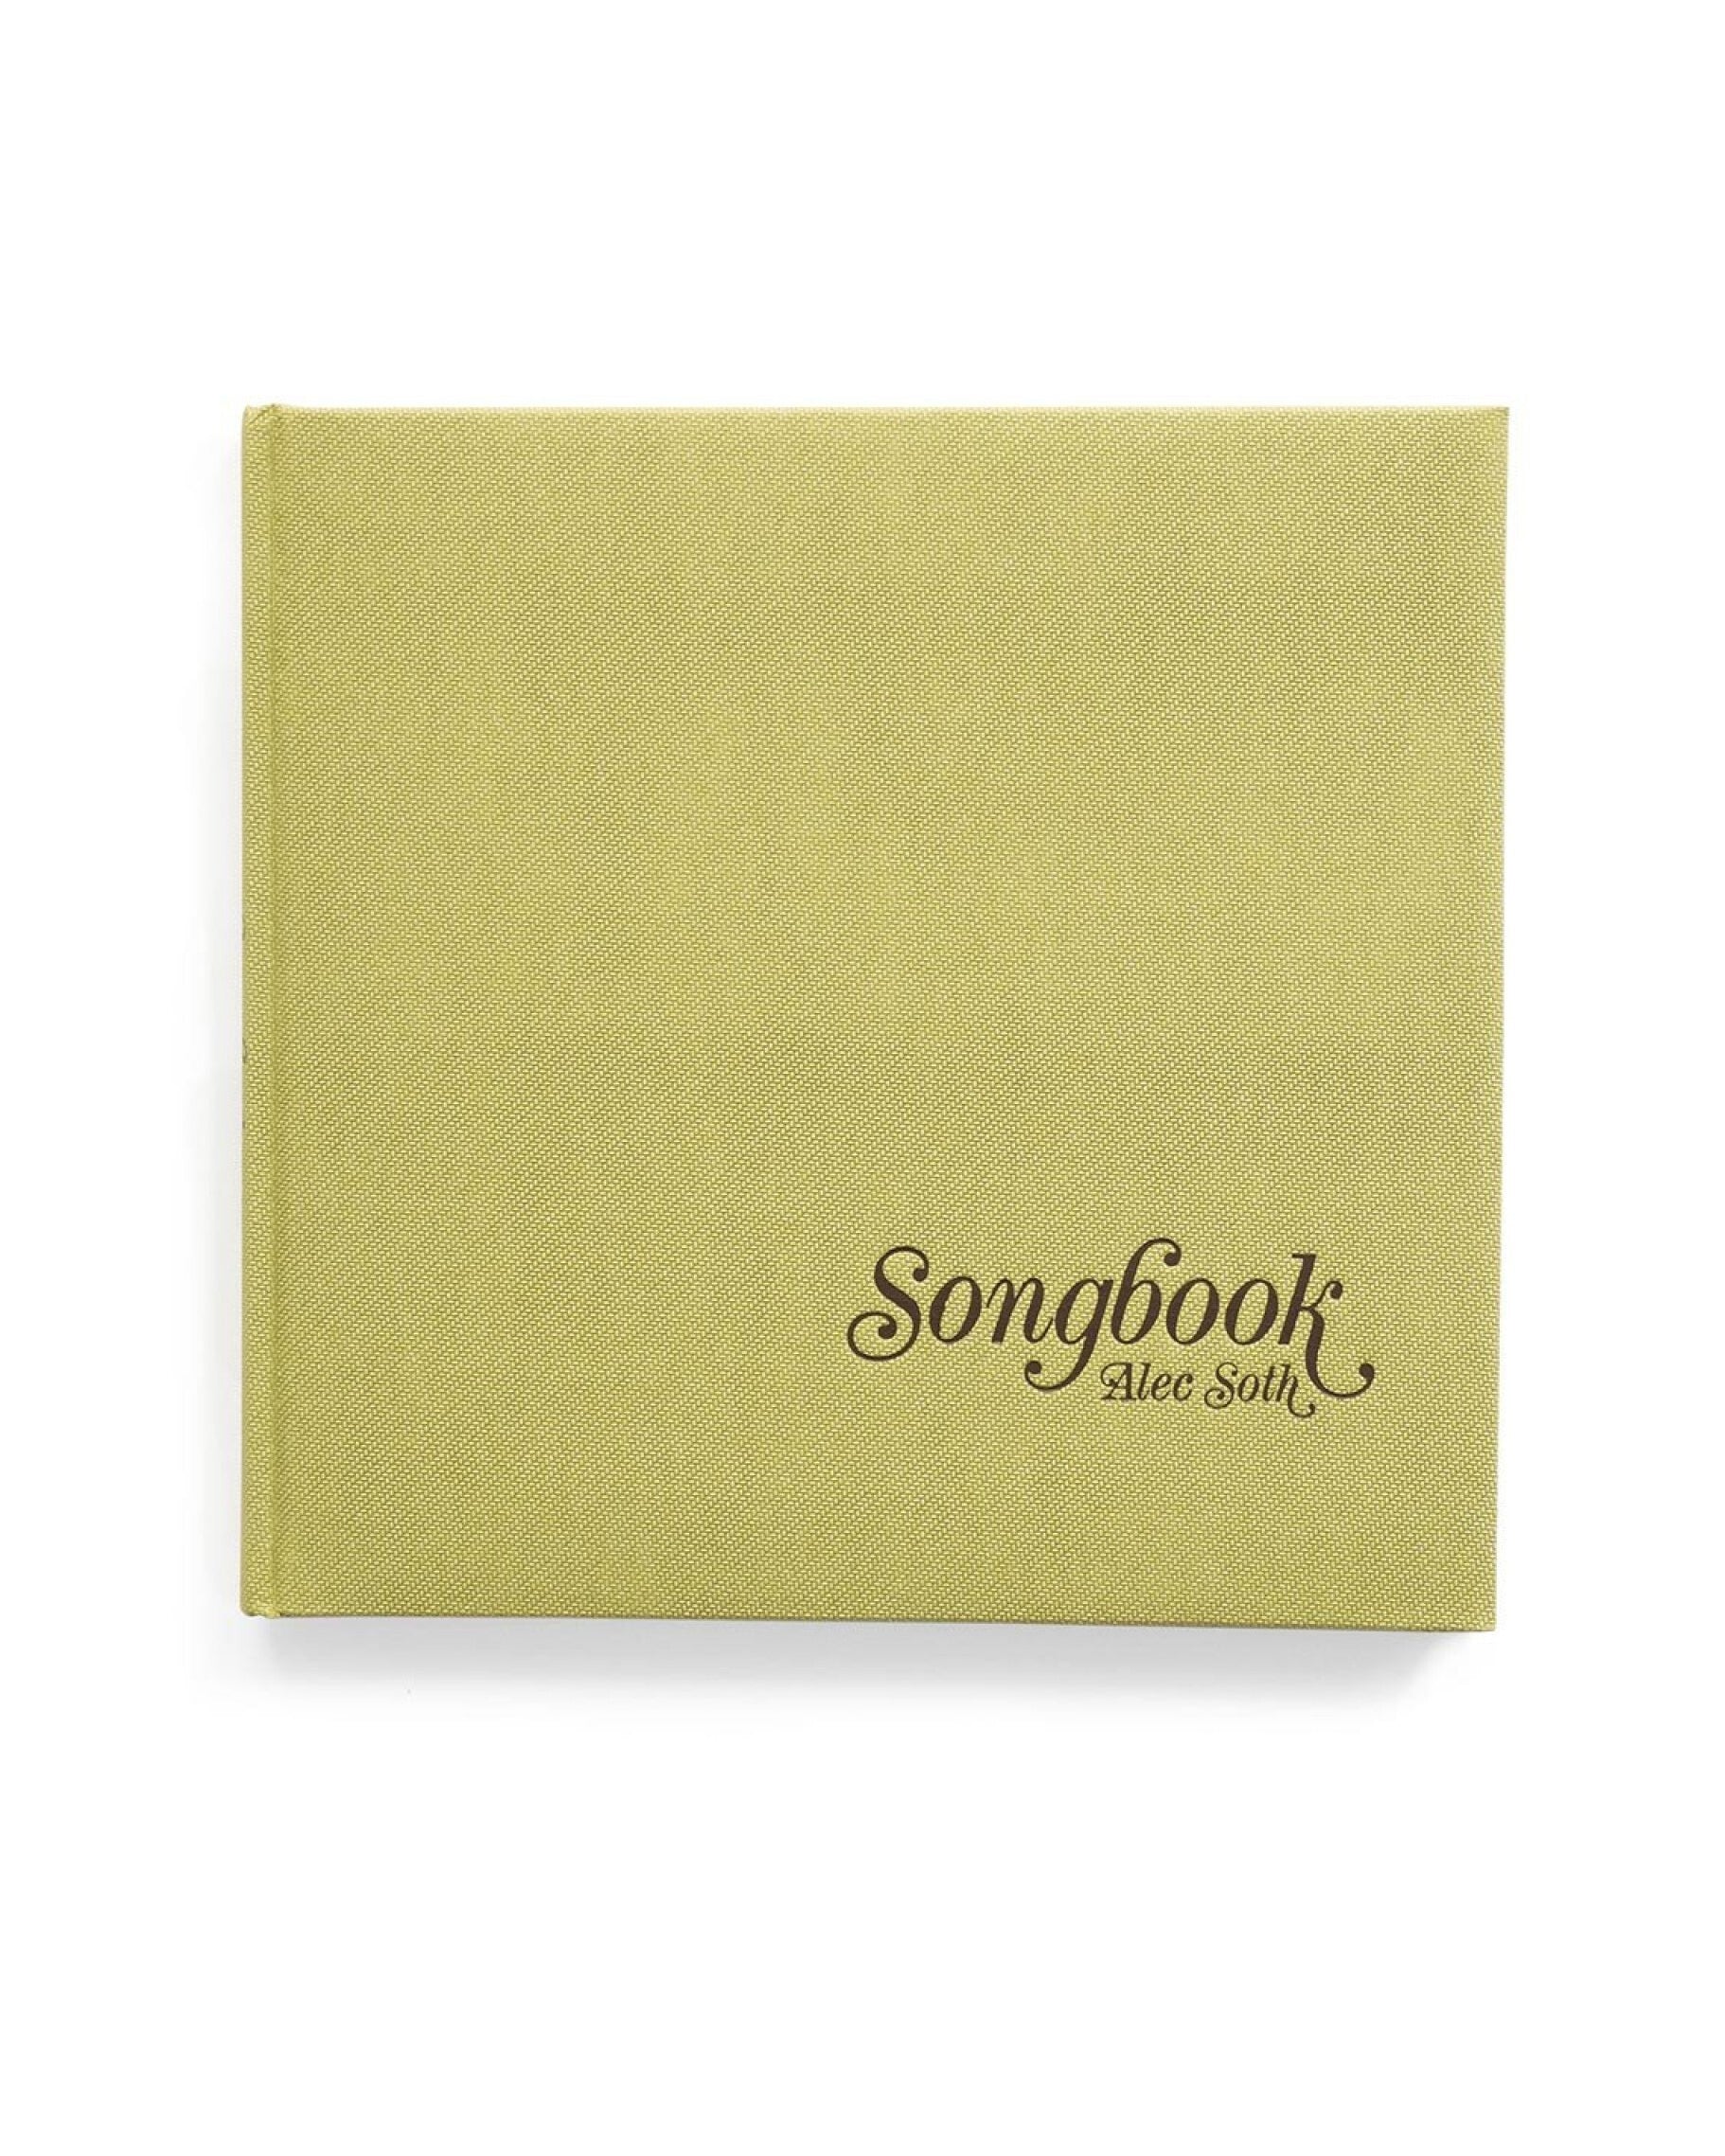 Songbook - First Edition